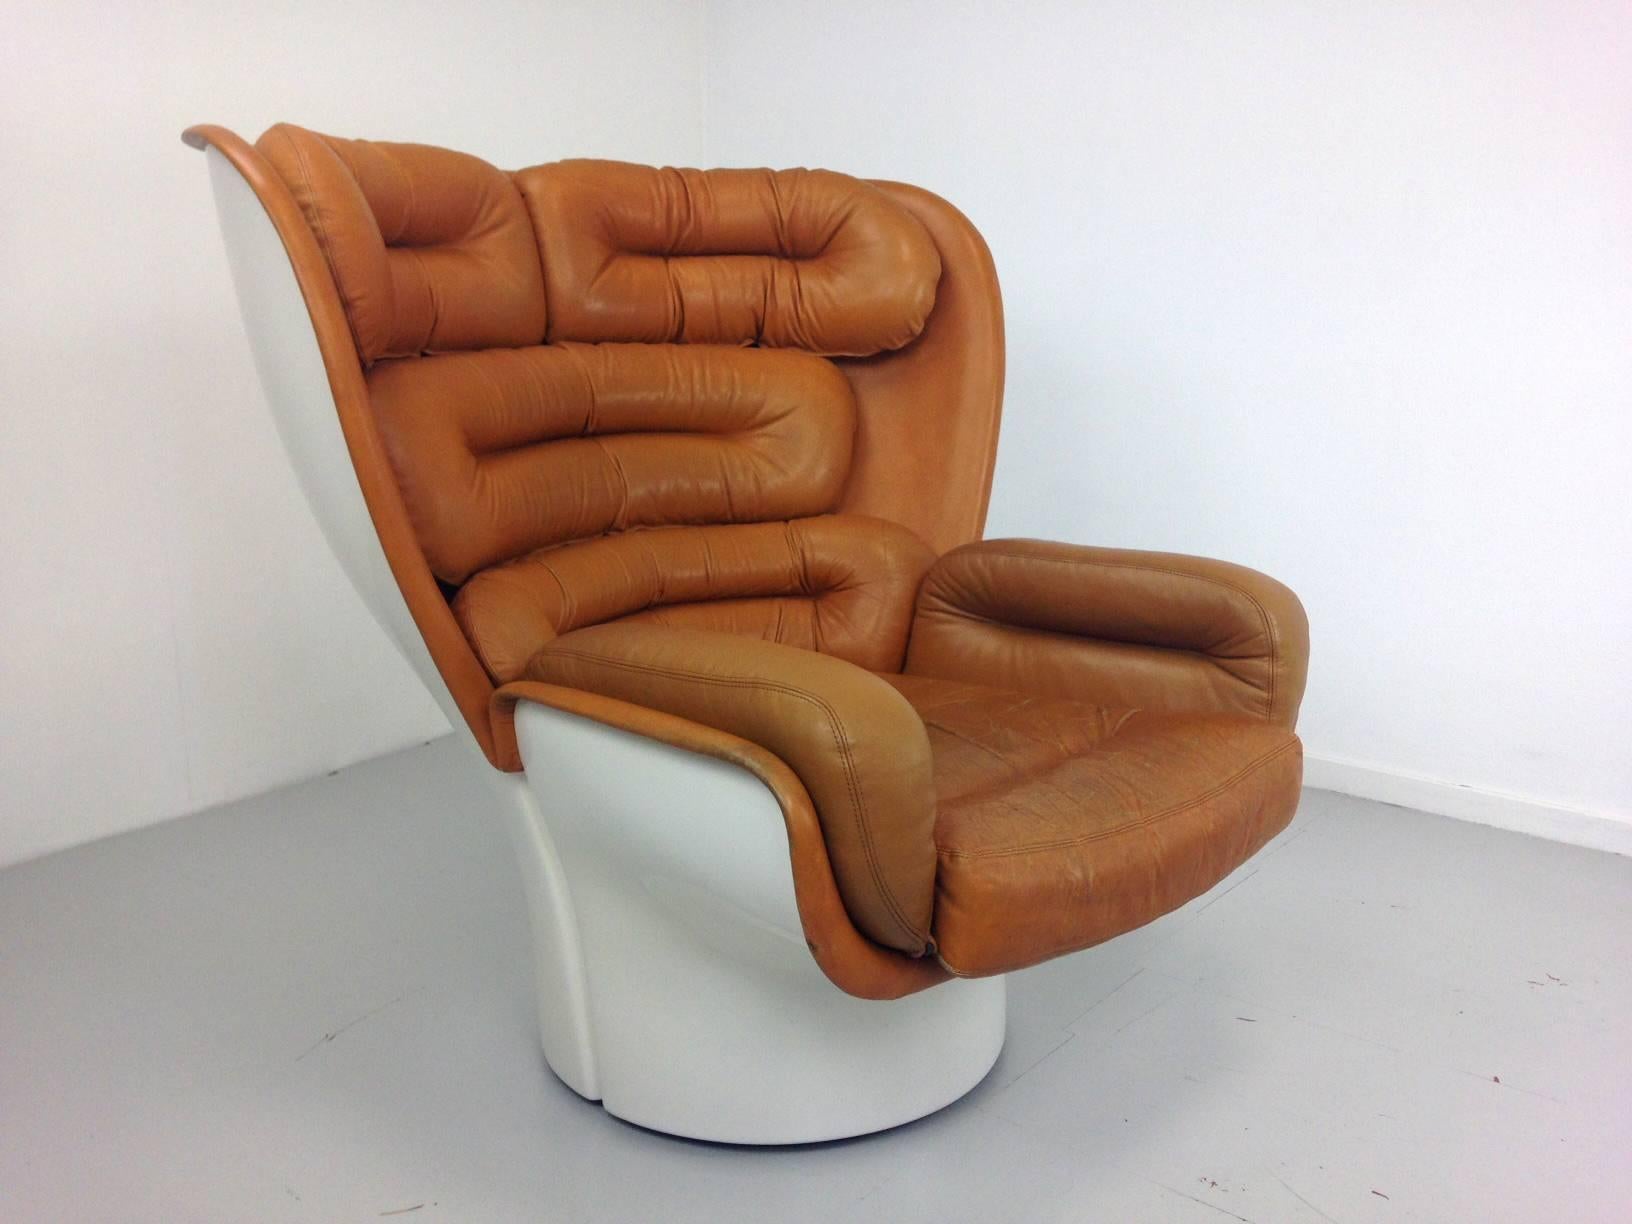 Elda by Joe Colombo for Comfort Italy, 1960s In Distressed Condition In The Hague, NL